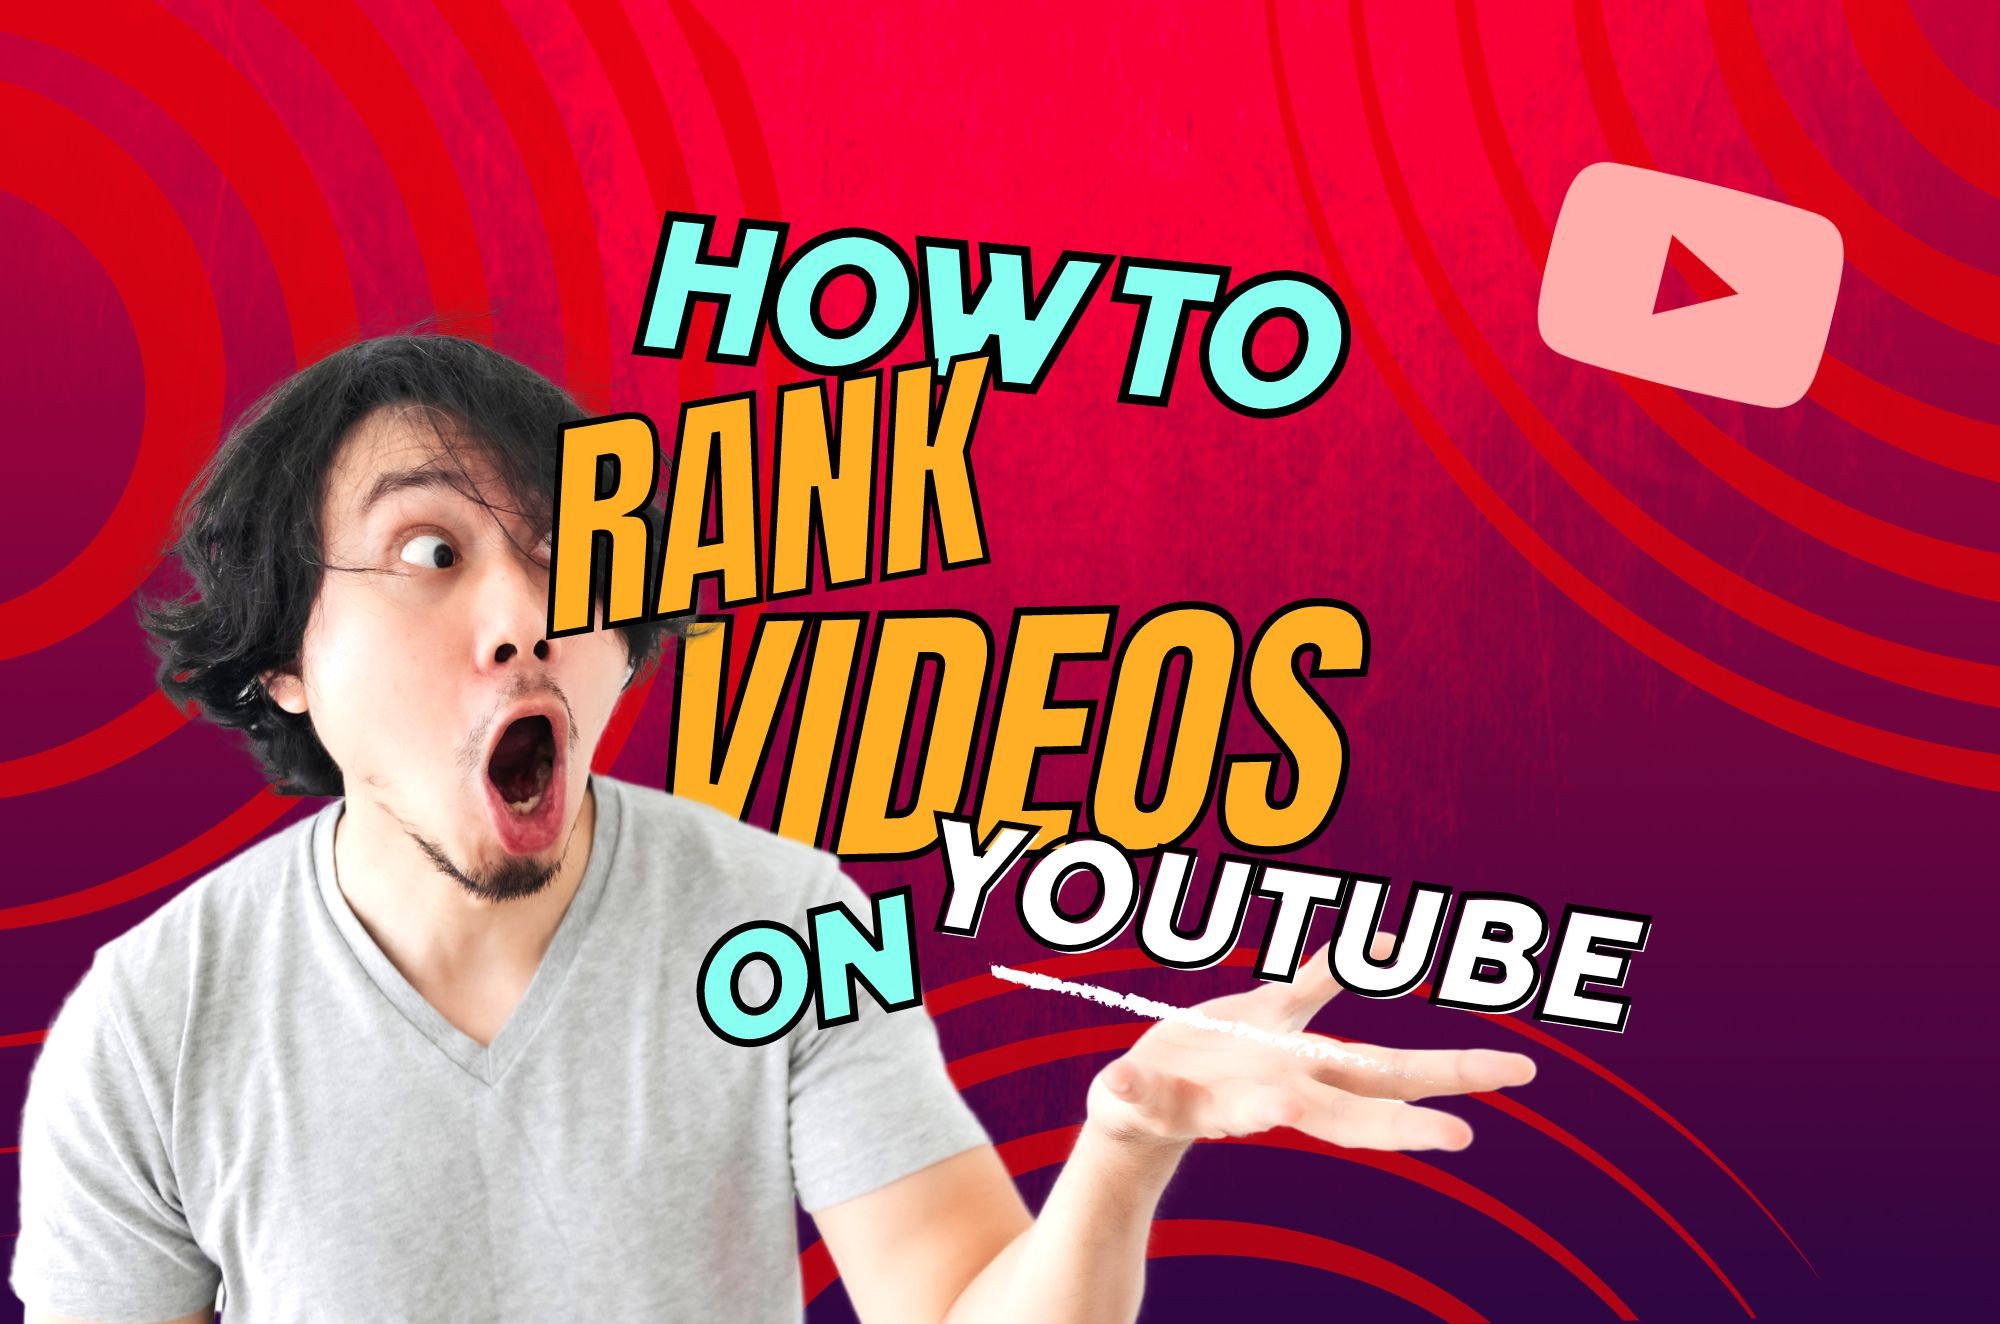 How to Rank Videos on YouTube for Success